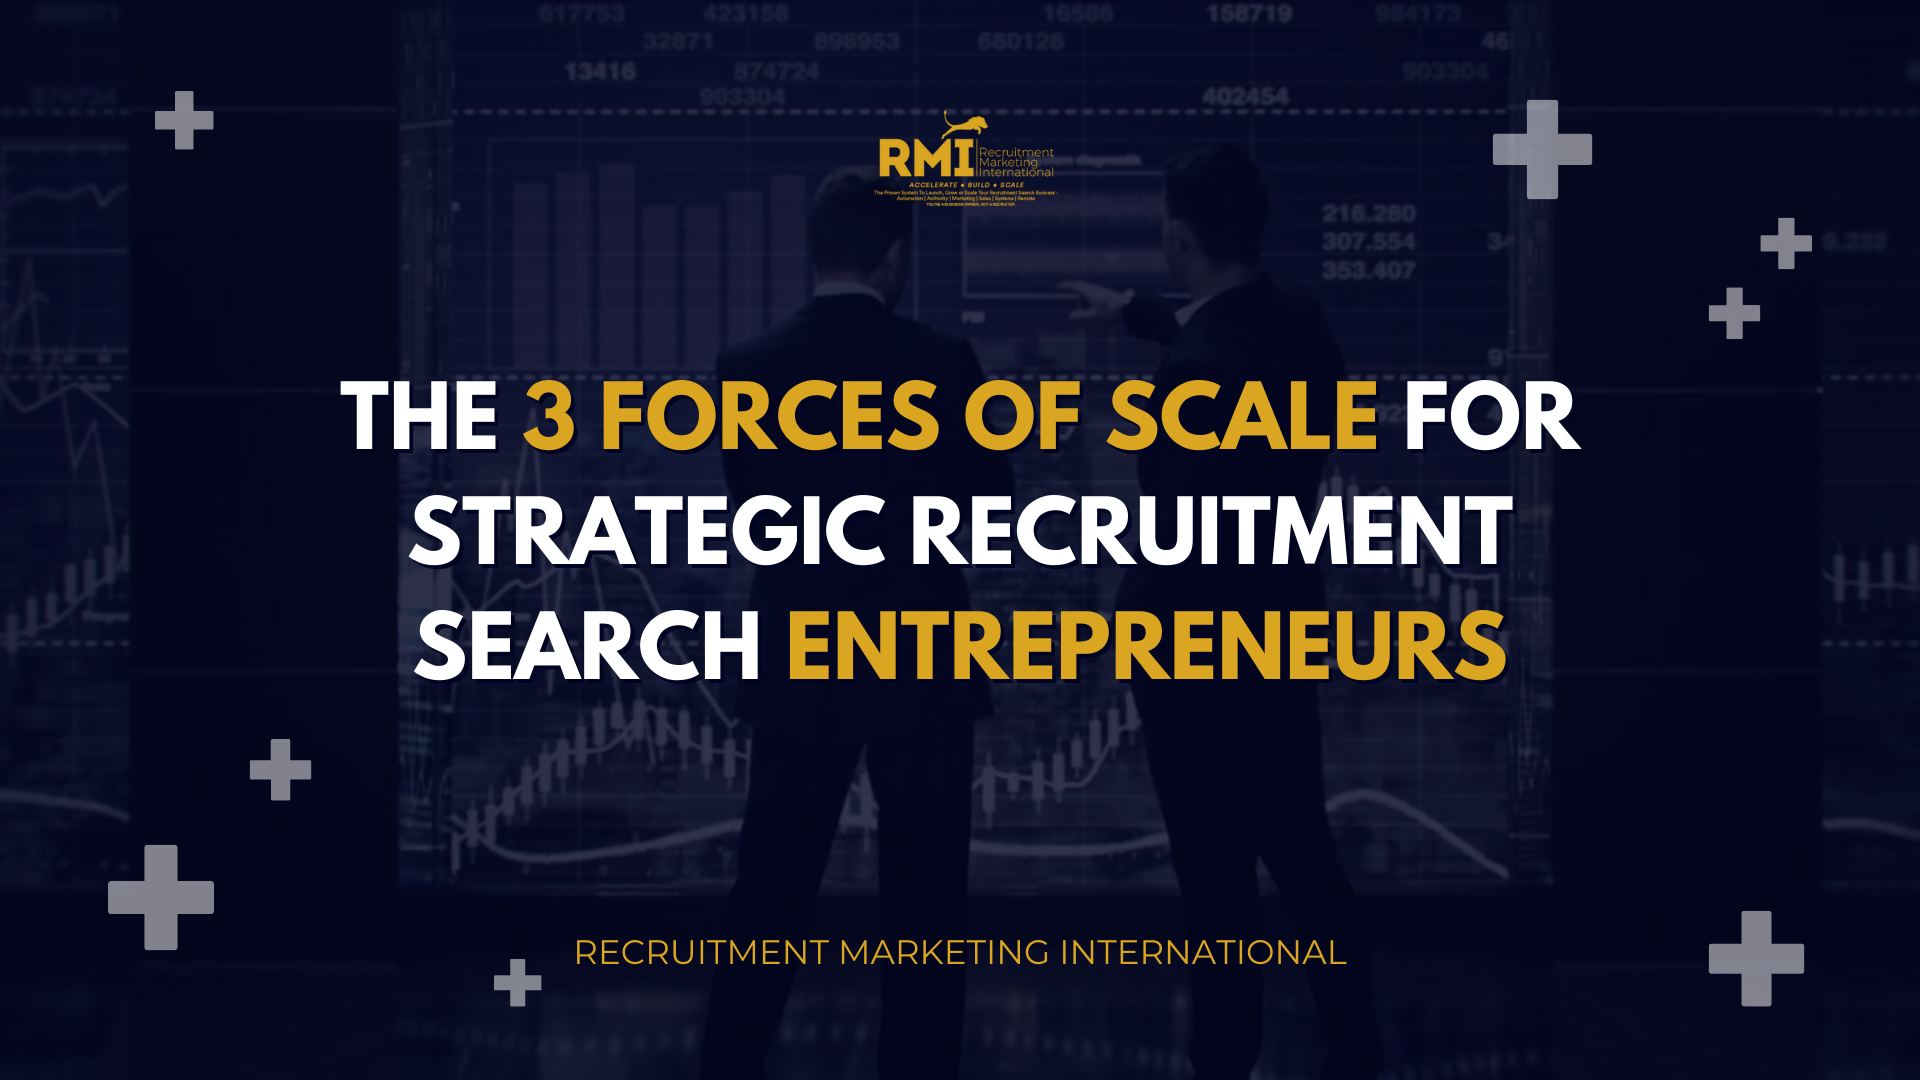 PODCAST 227 – THE 3 FORCES OF SCALE FOR STRATEGIC RECRUITMENT SEARCH ENTREPRENEURS